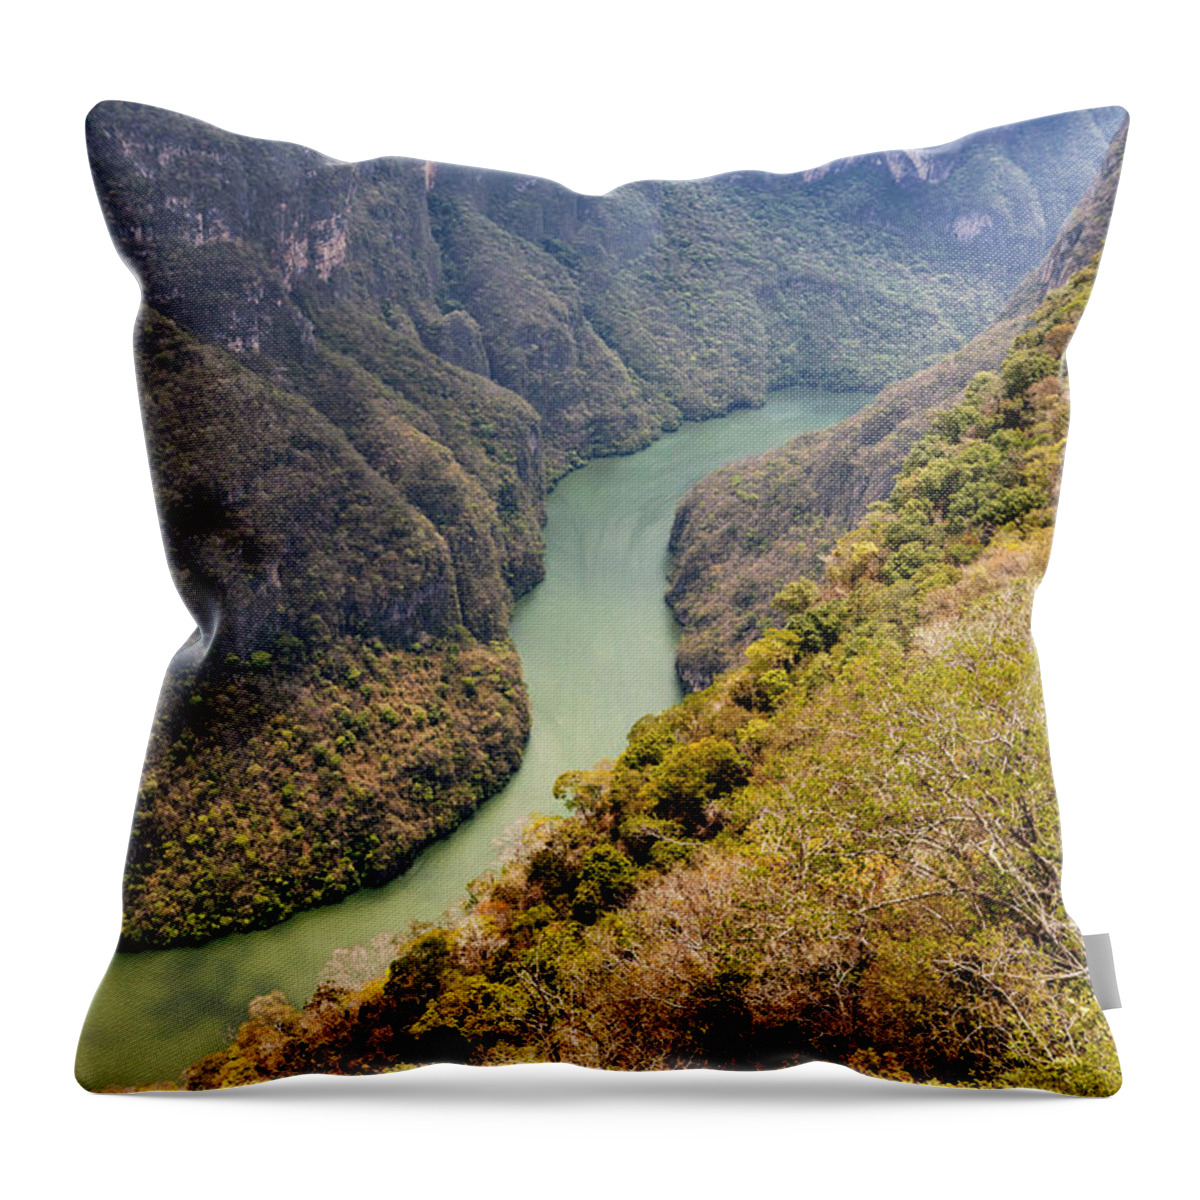 Estock Throw Pillow featuring the digital art Mexico, Chiapas, Overview Of Sumidero Canyon by Claudia Uripos